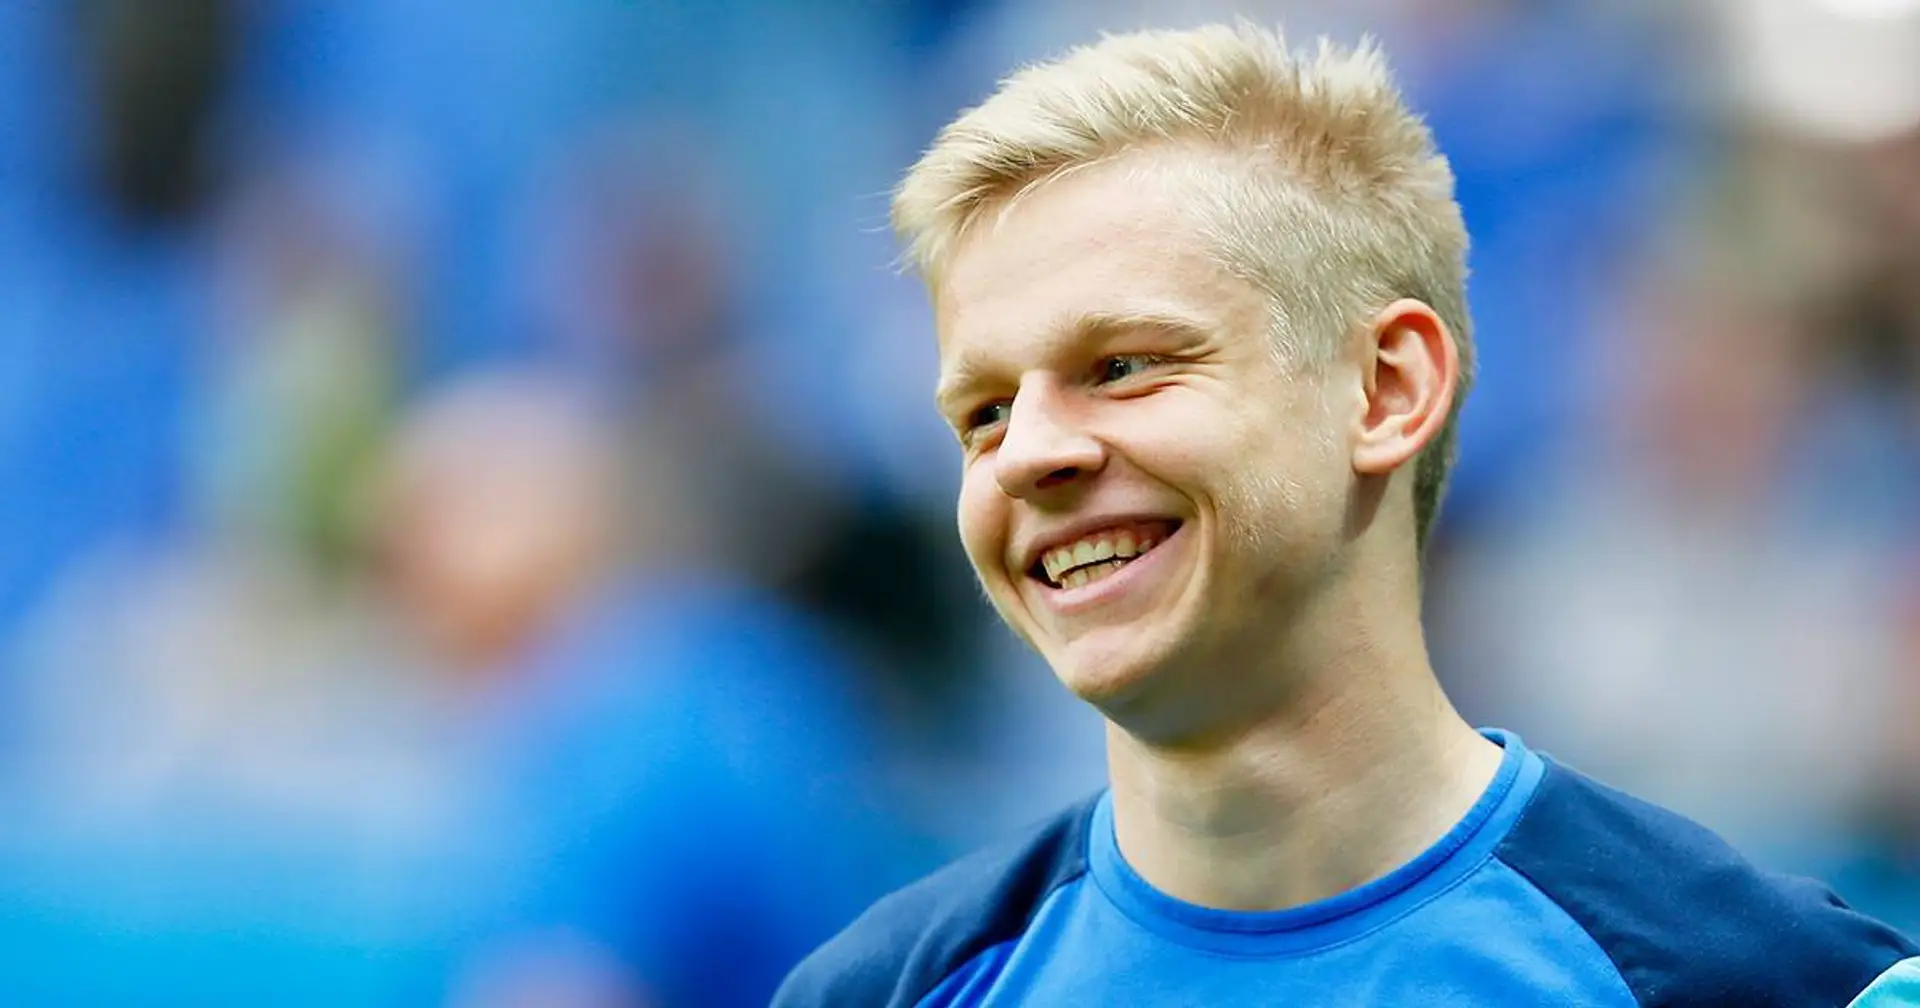 3 reasons why Barca could be interested in City's versatile defender Zinchenko